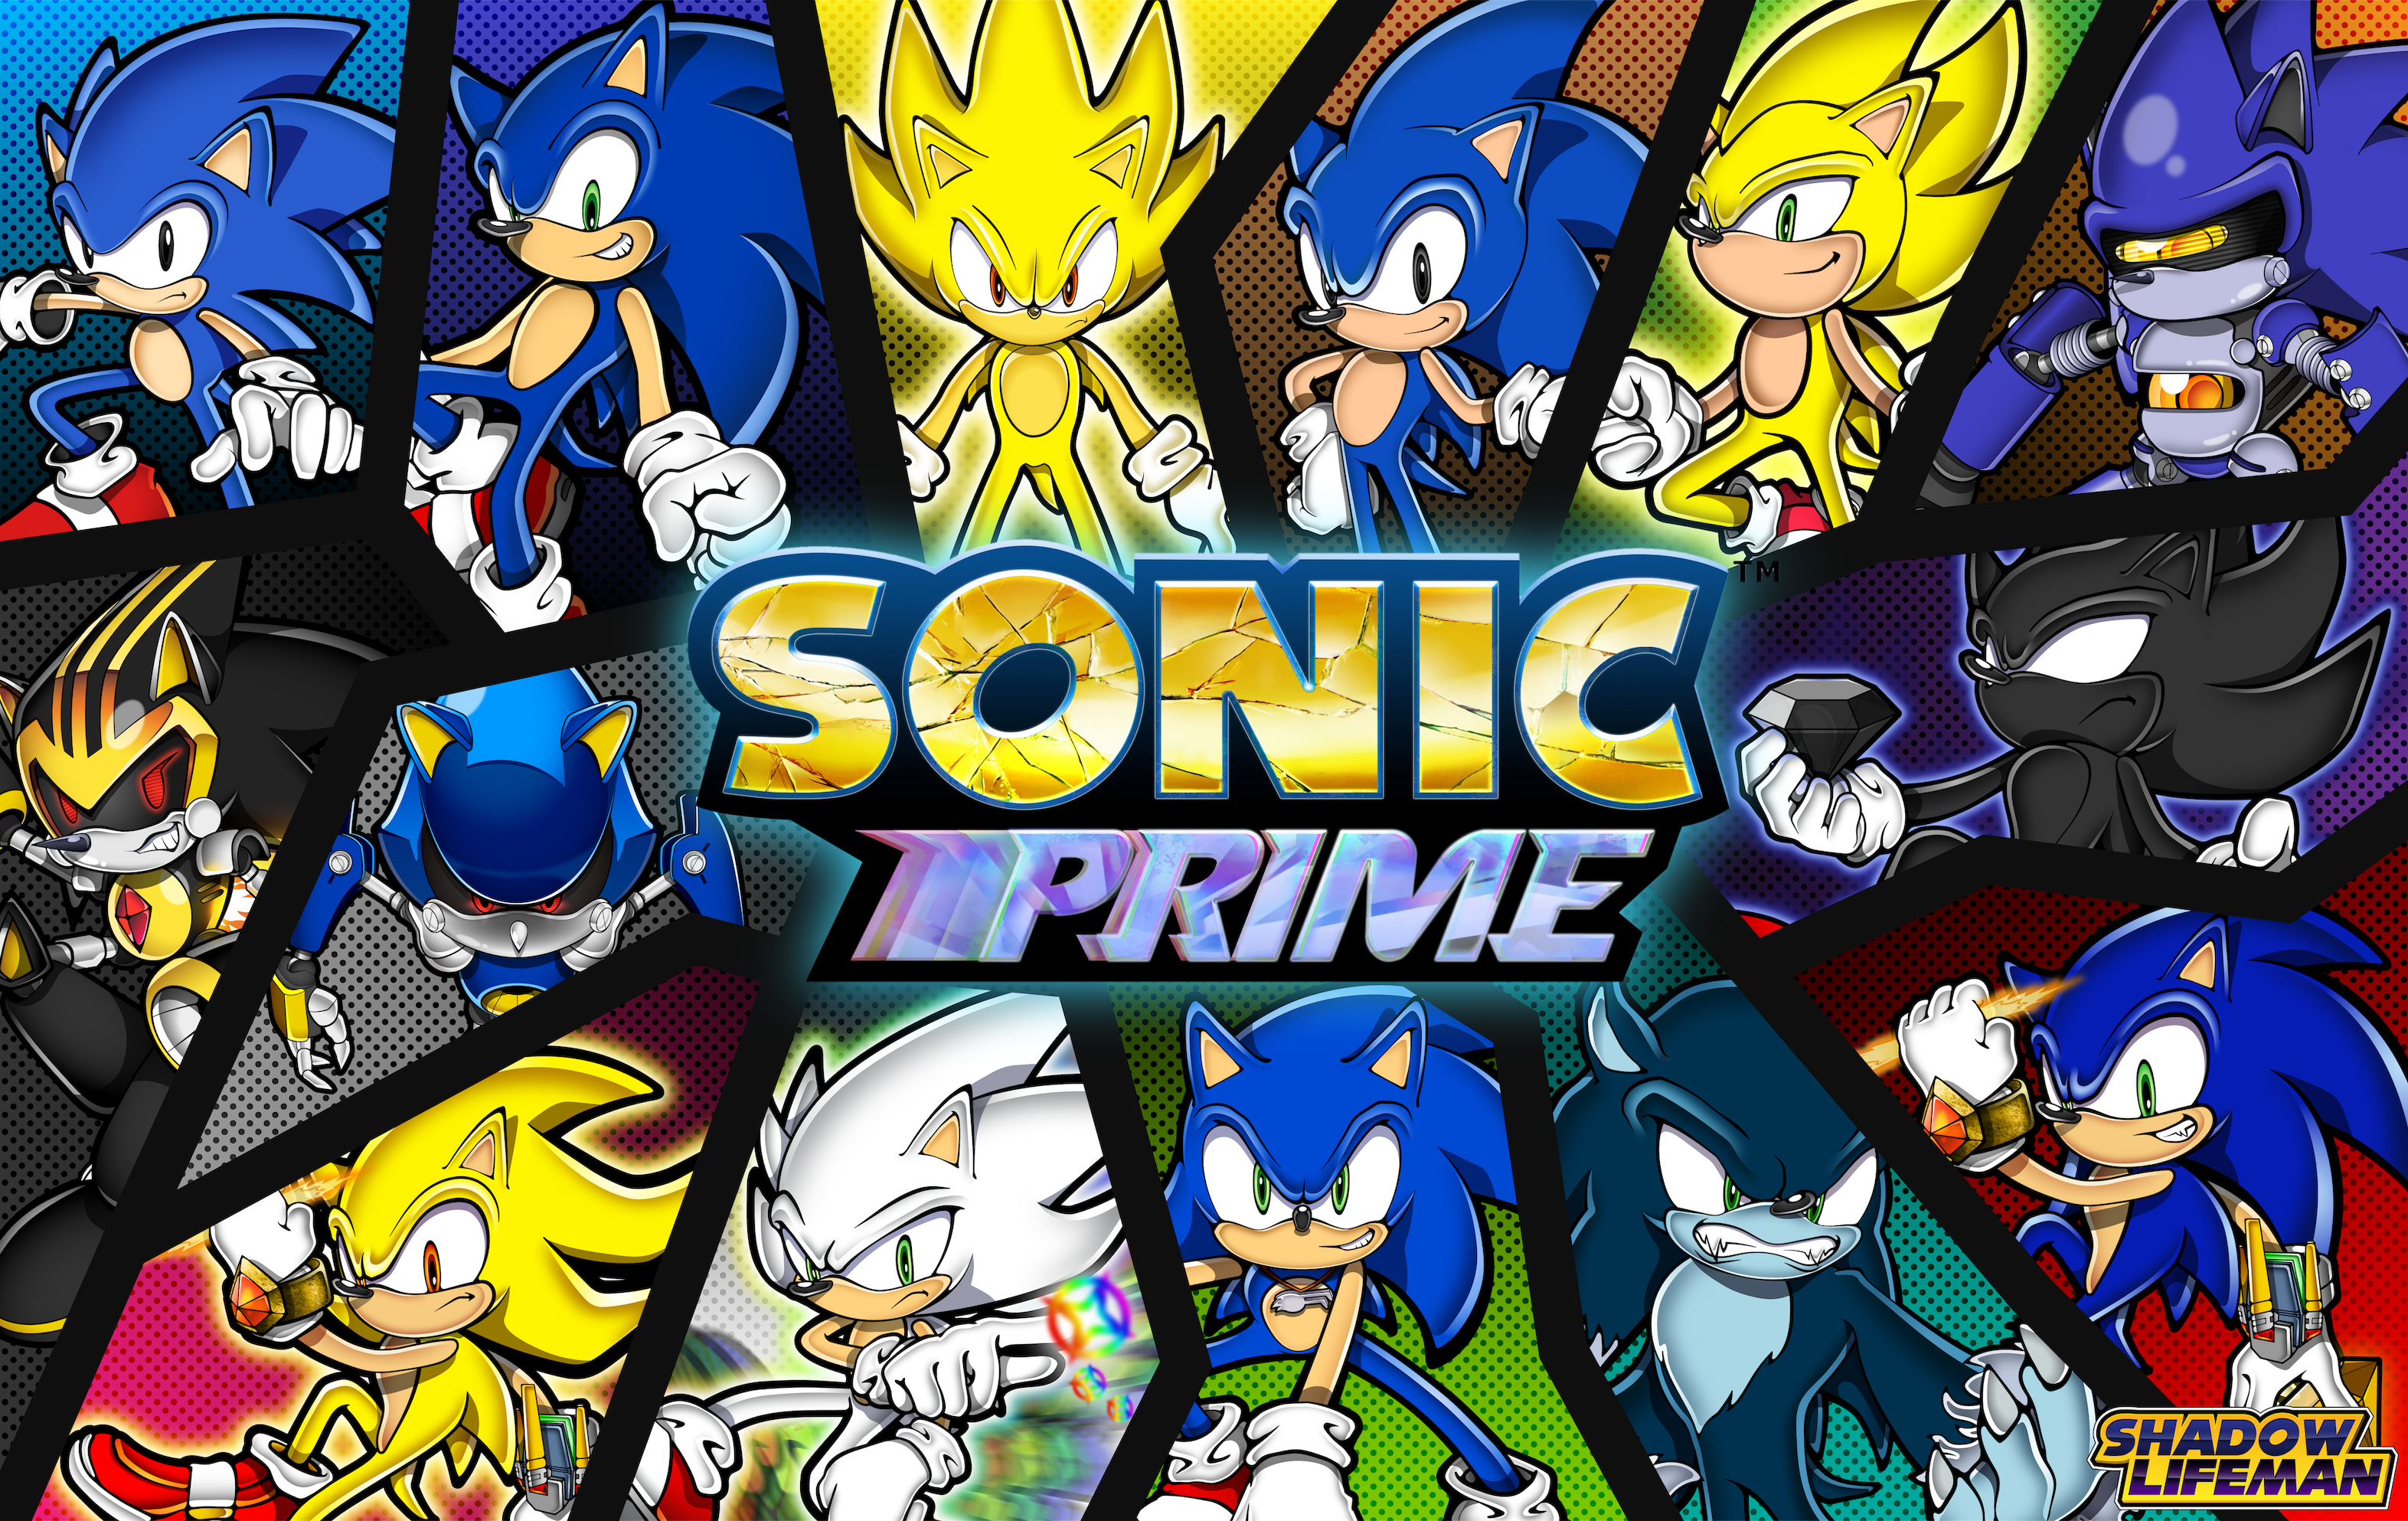 Sonic Prime Official Poster Updated Version By D by awh3568 on DeviantArt